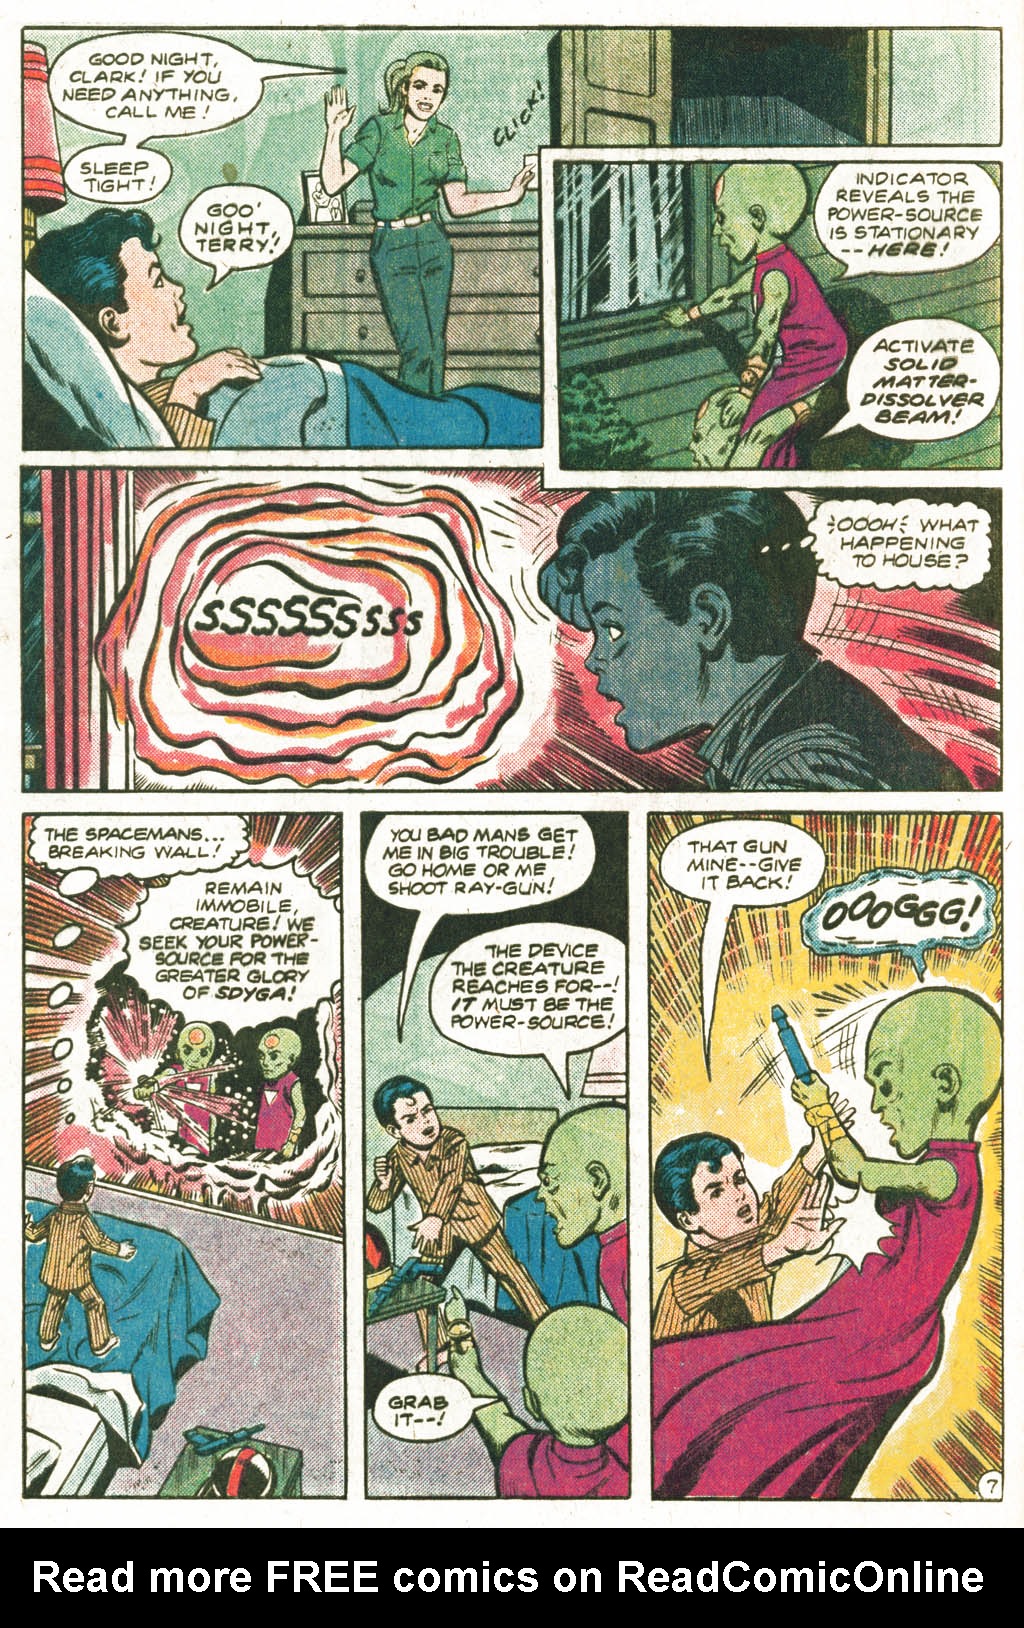 The New Adventures of Superboy 24 Page 26